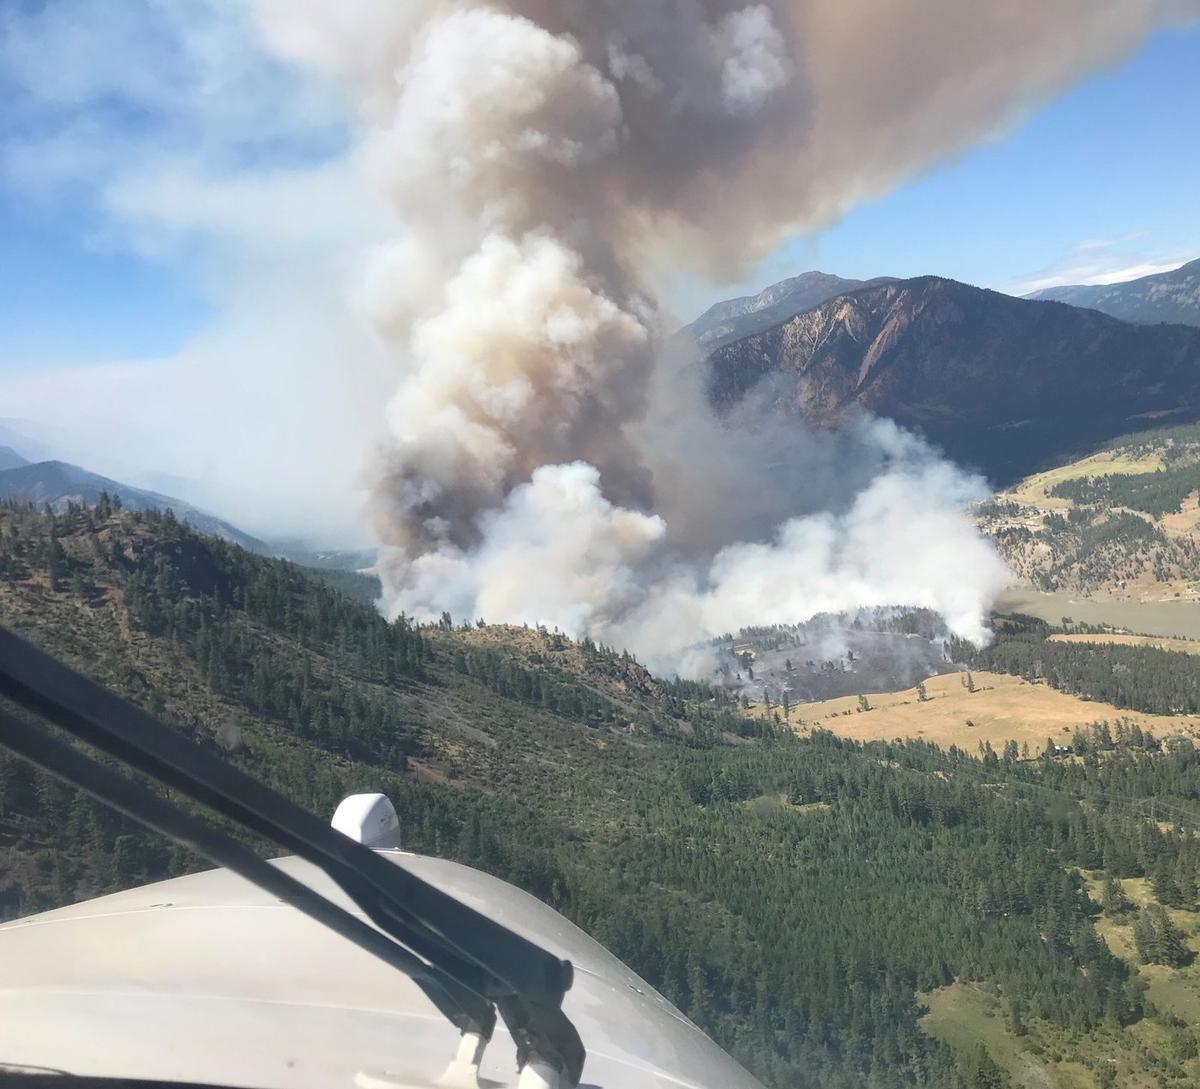 Six Homes Destroyed, No Injuries Reported in 'Daunting' Wildfire West of Lytton, BC